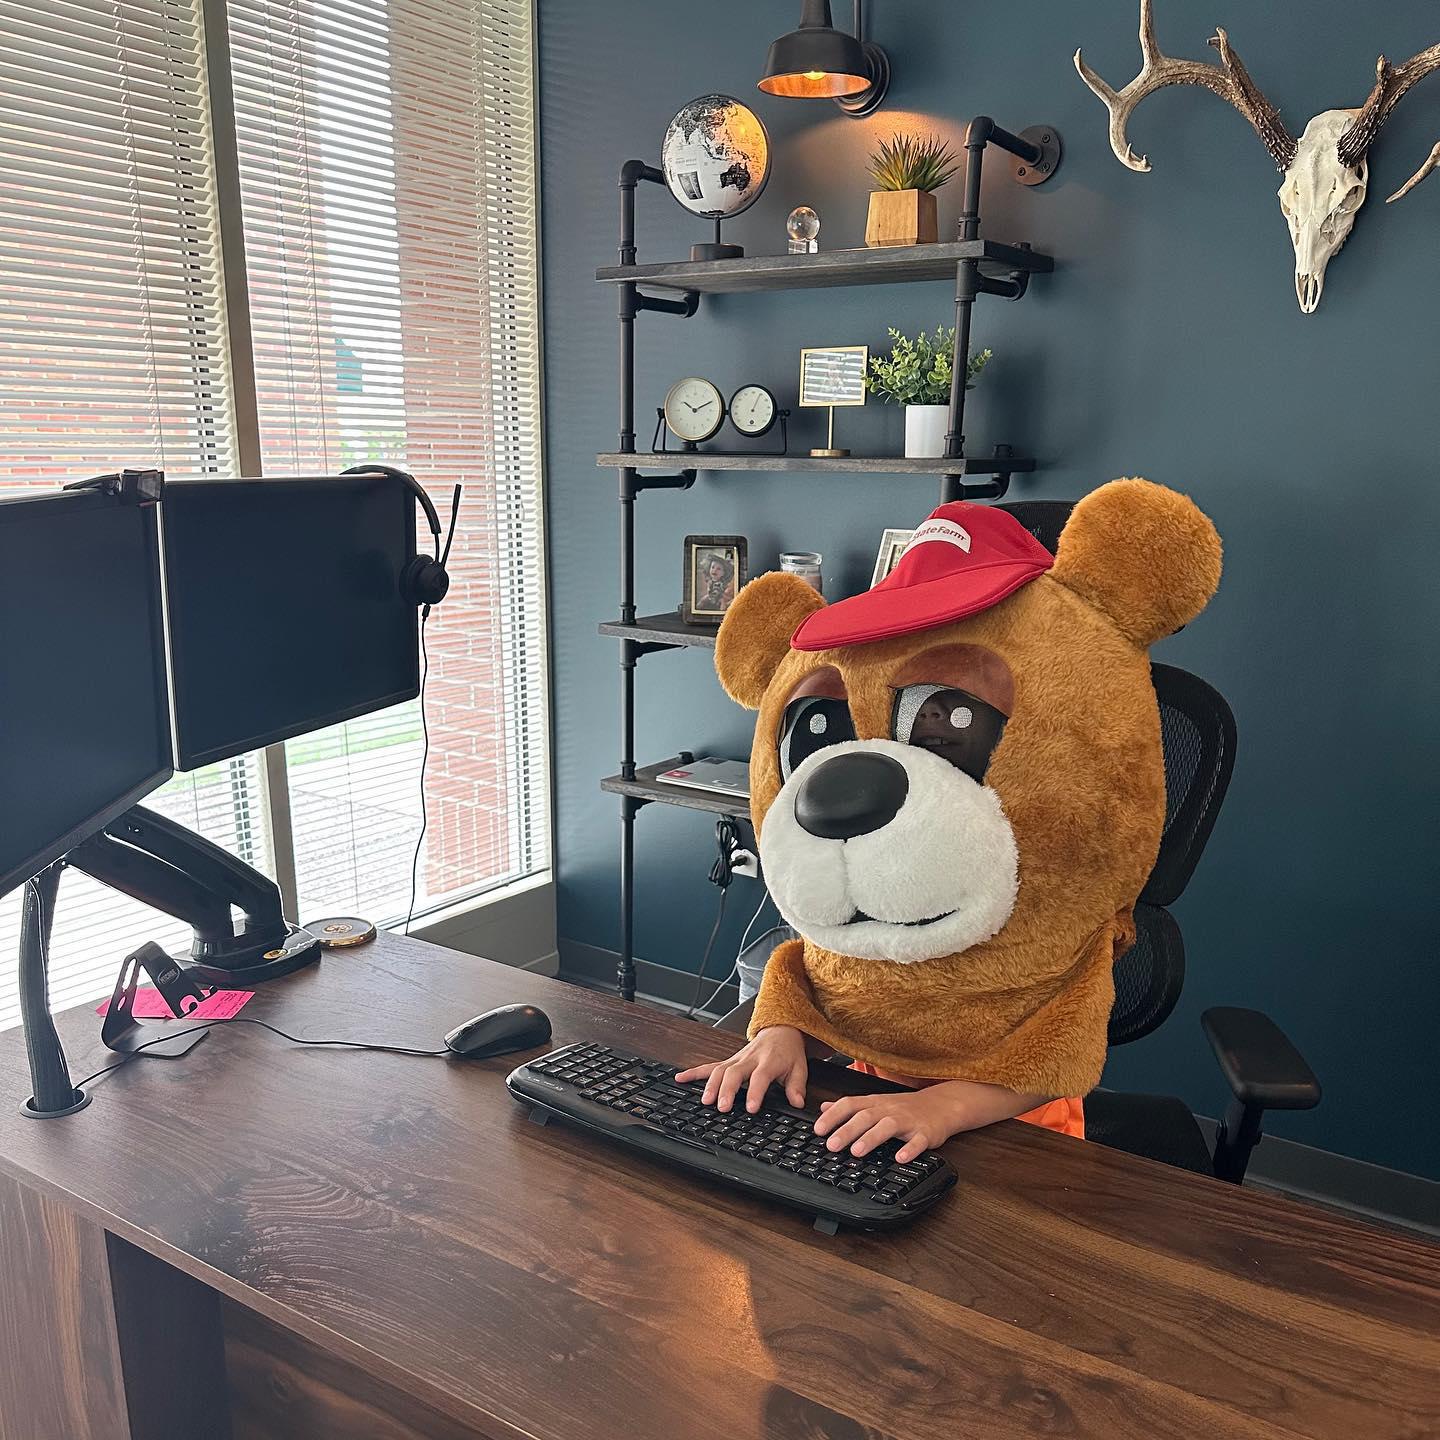 While Zach was in a life insurance meeting, the Good Neighbear stepped in to answer customer calls 🐻